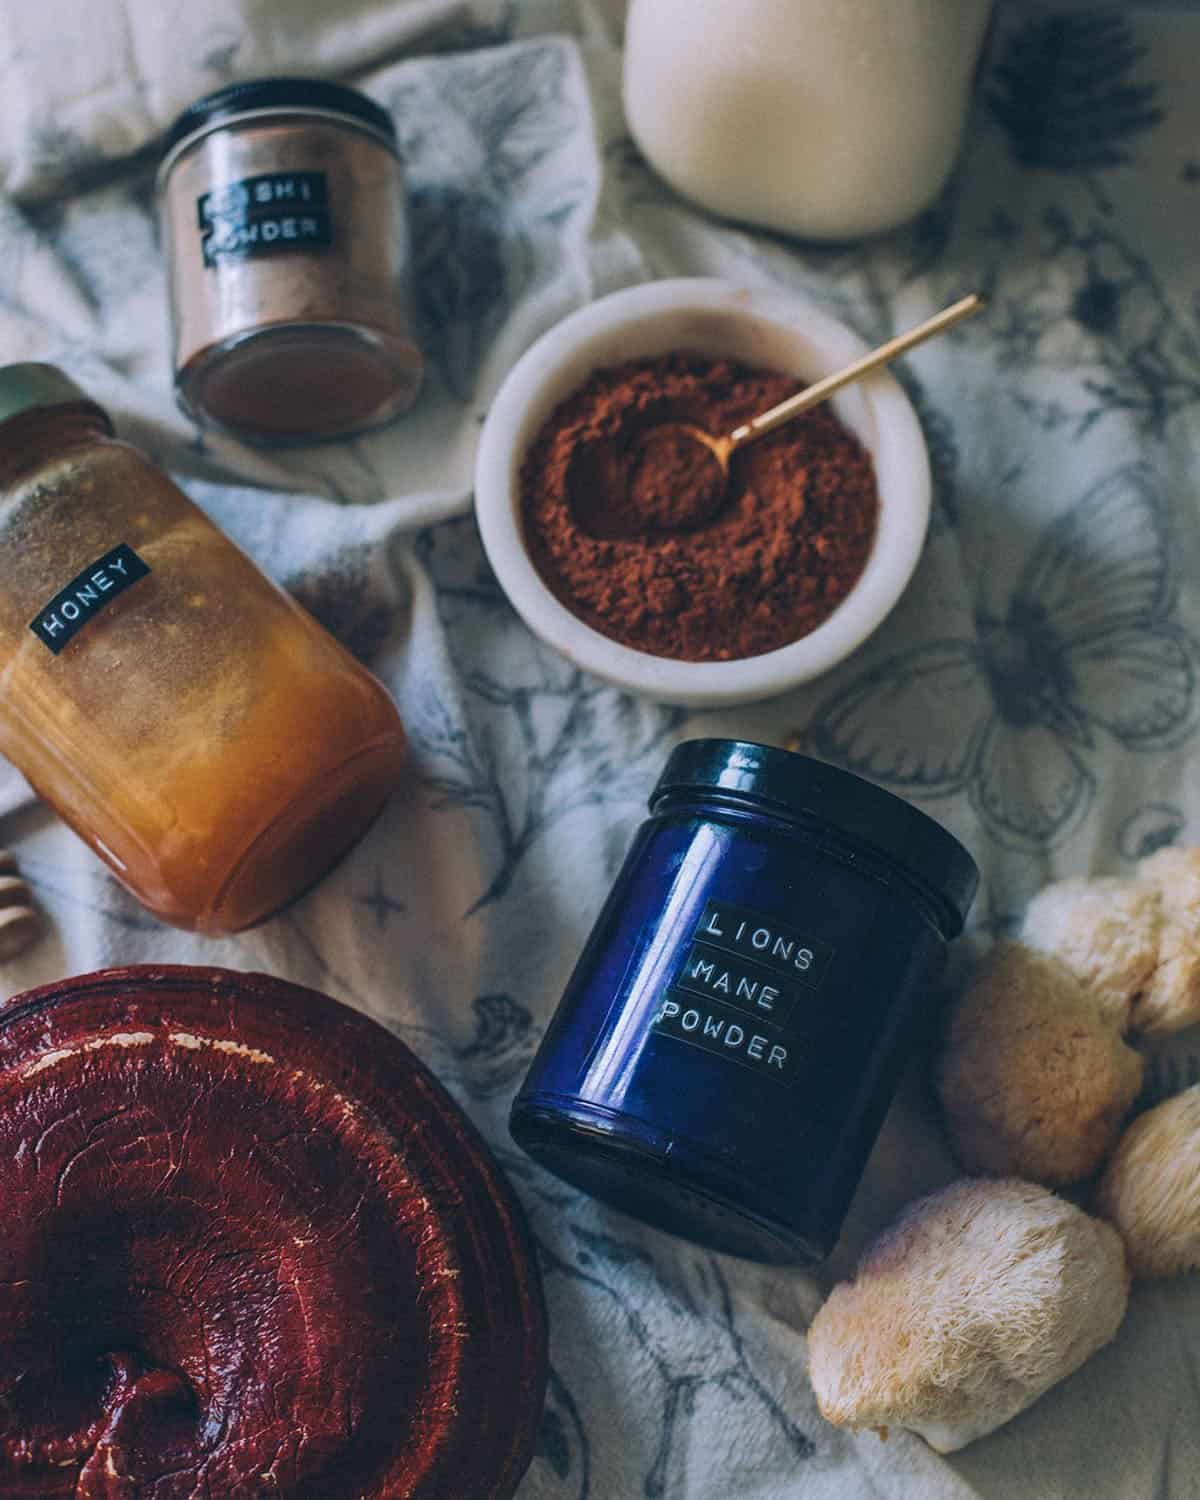 jars of reishi and lion's mane powder, a bowl of cocoa powder, and a jar of honey